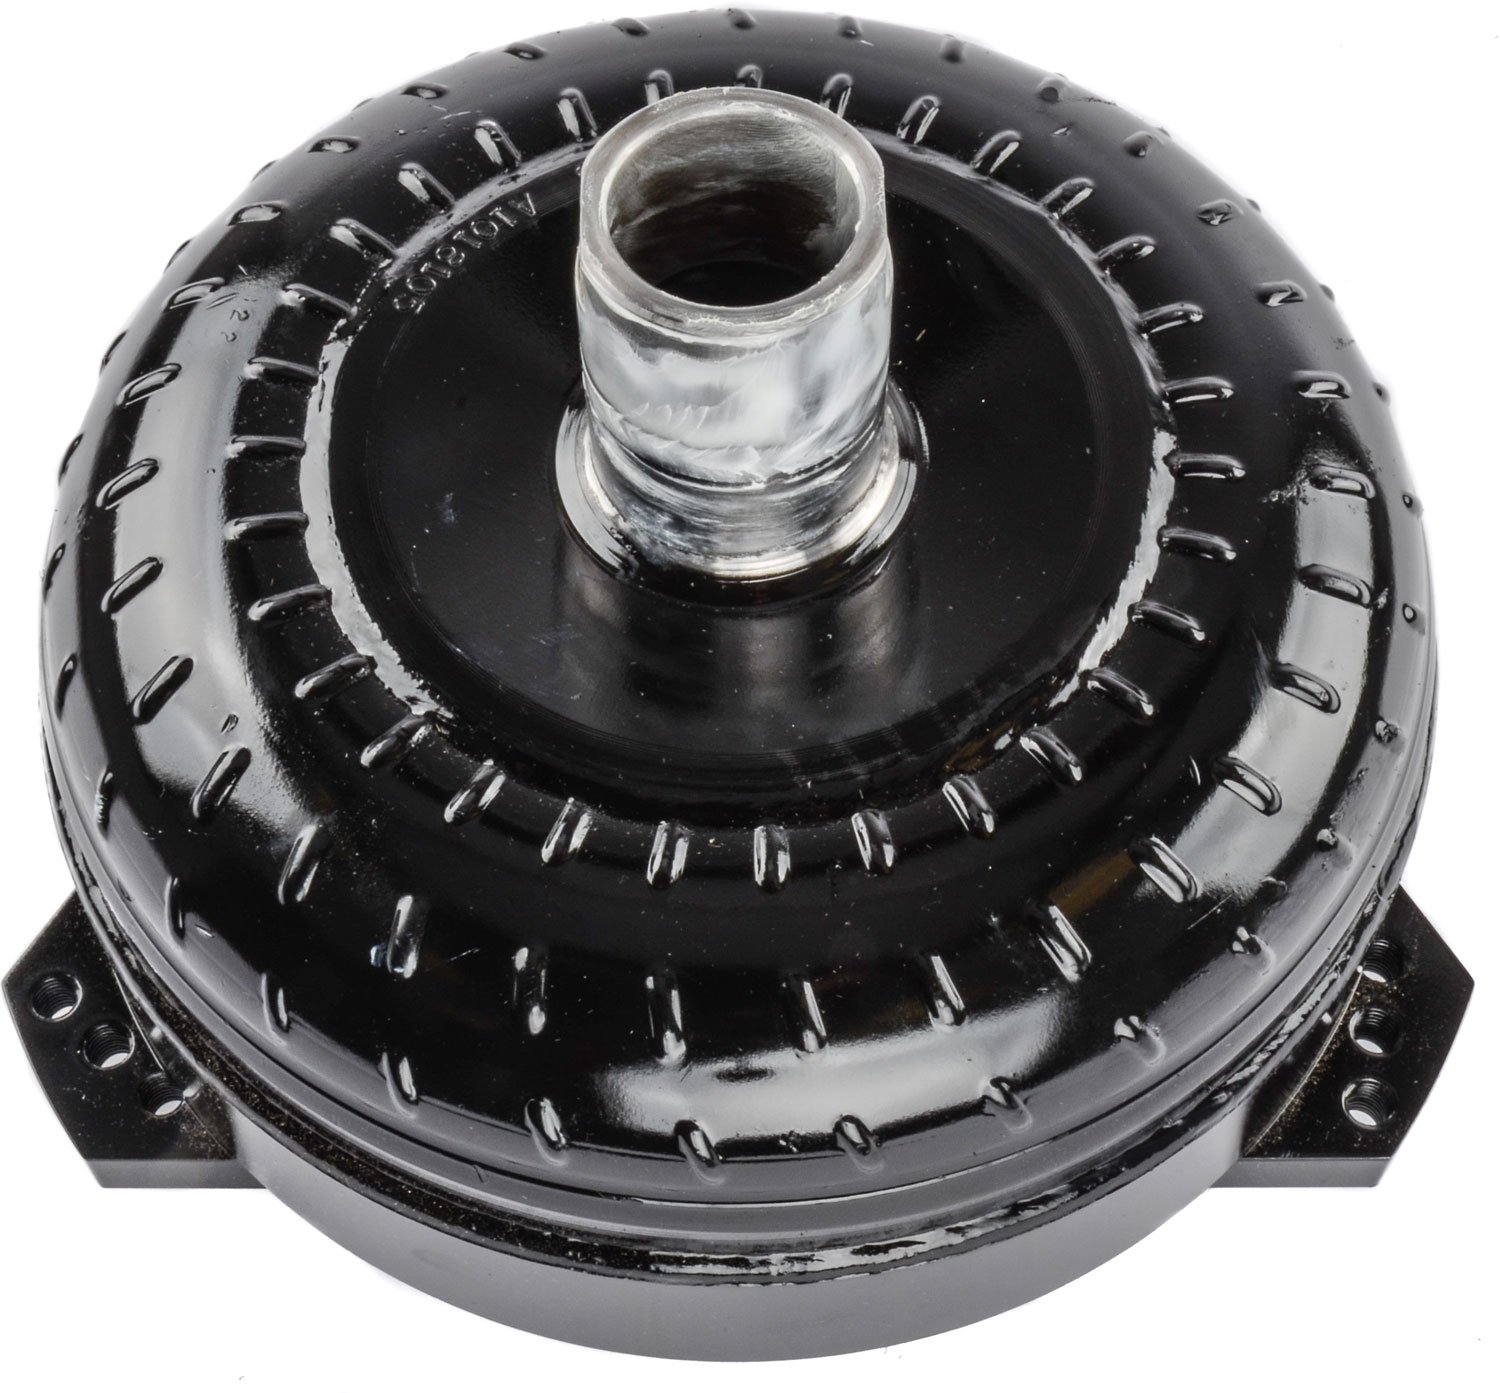 Torque Converter for GM 4L80E/4L85E Mounted to a Non-LS Series Engine [2900-3200 RPM Stall Speed]